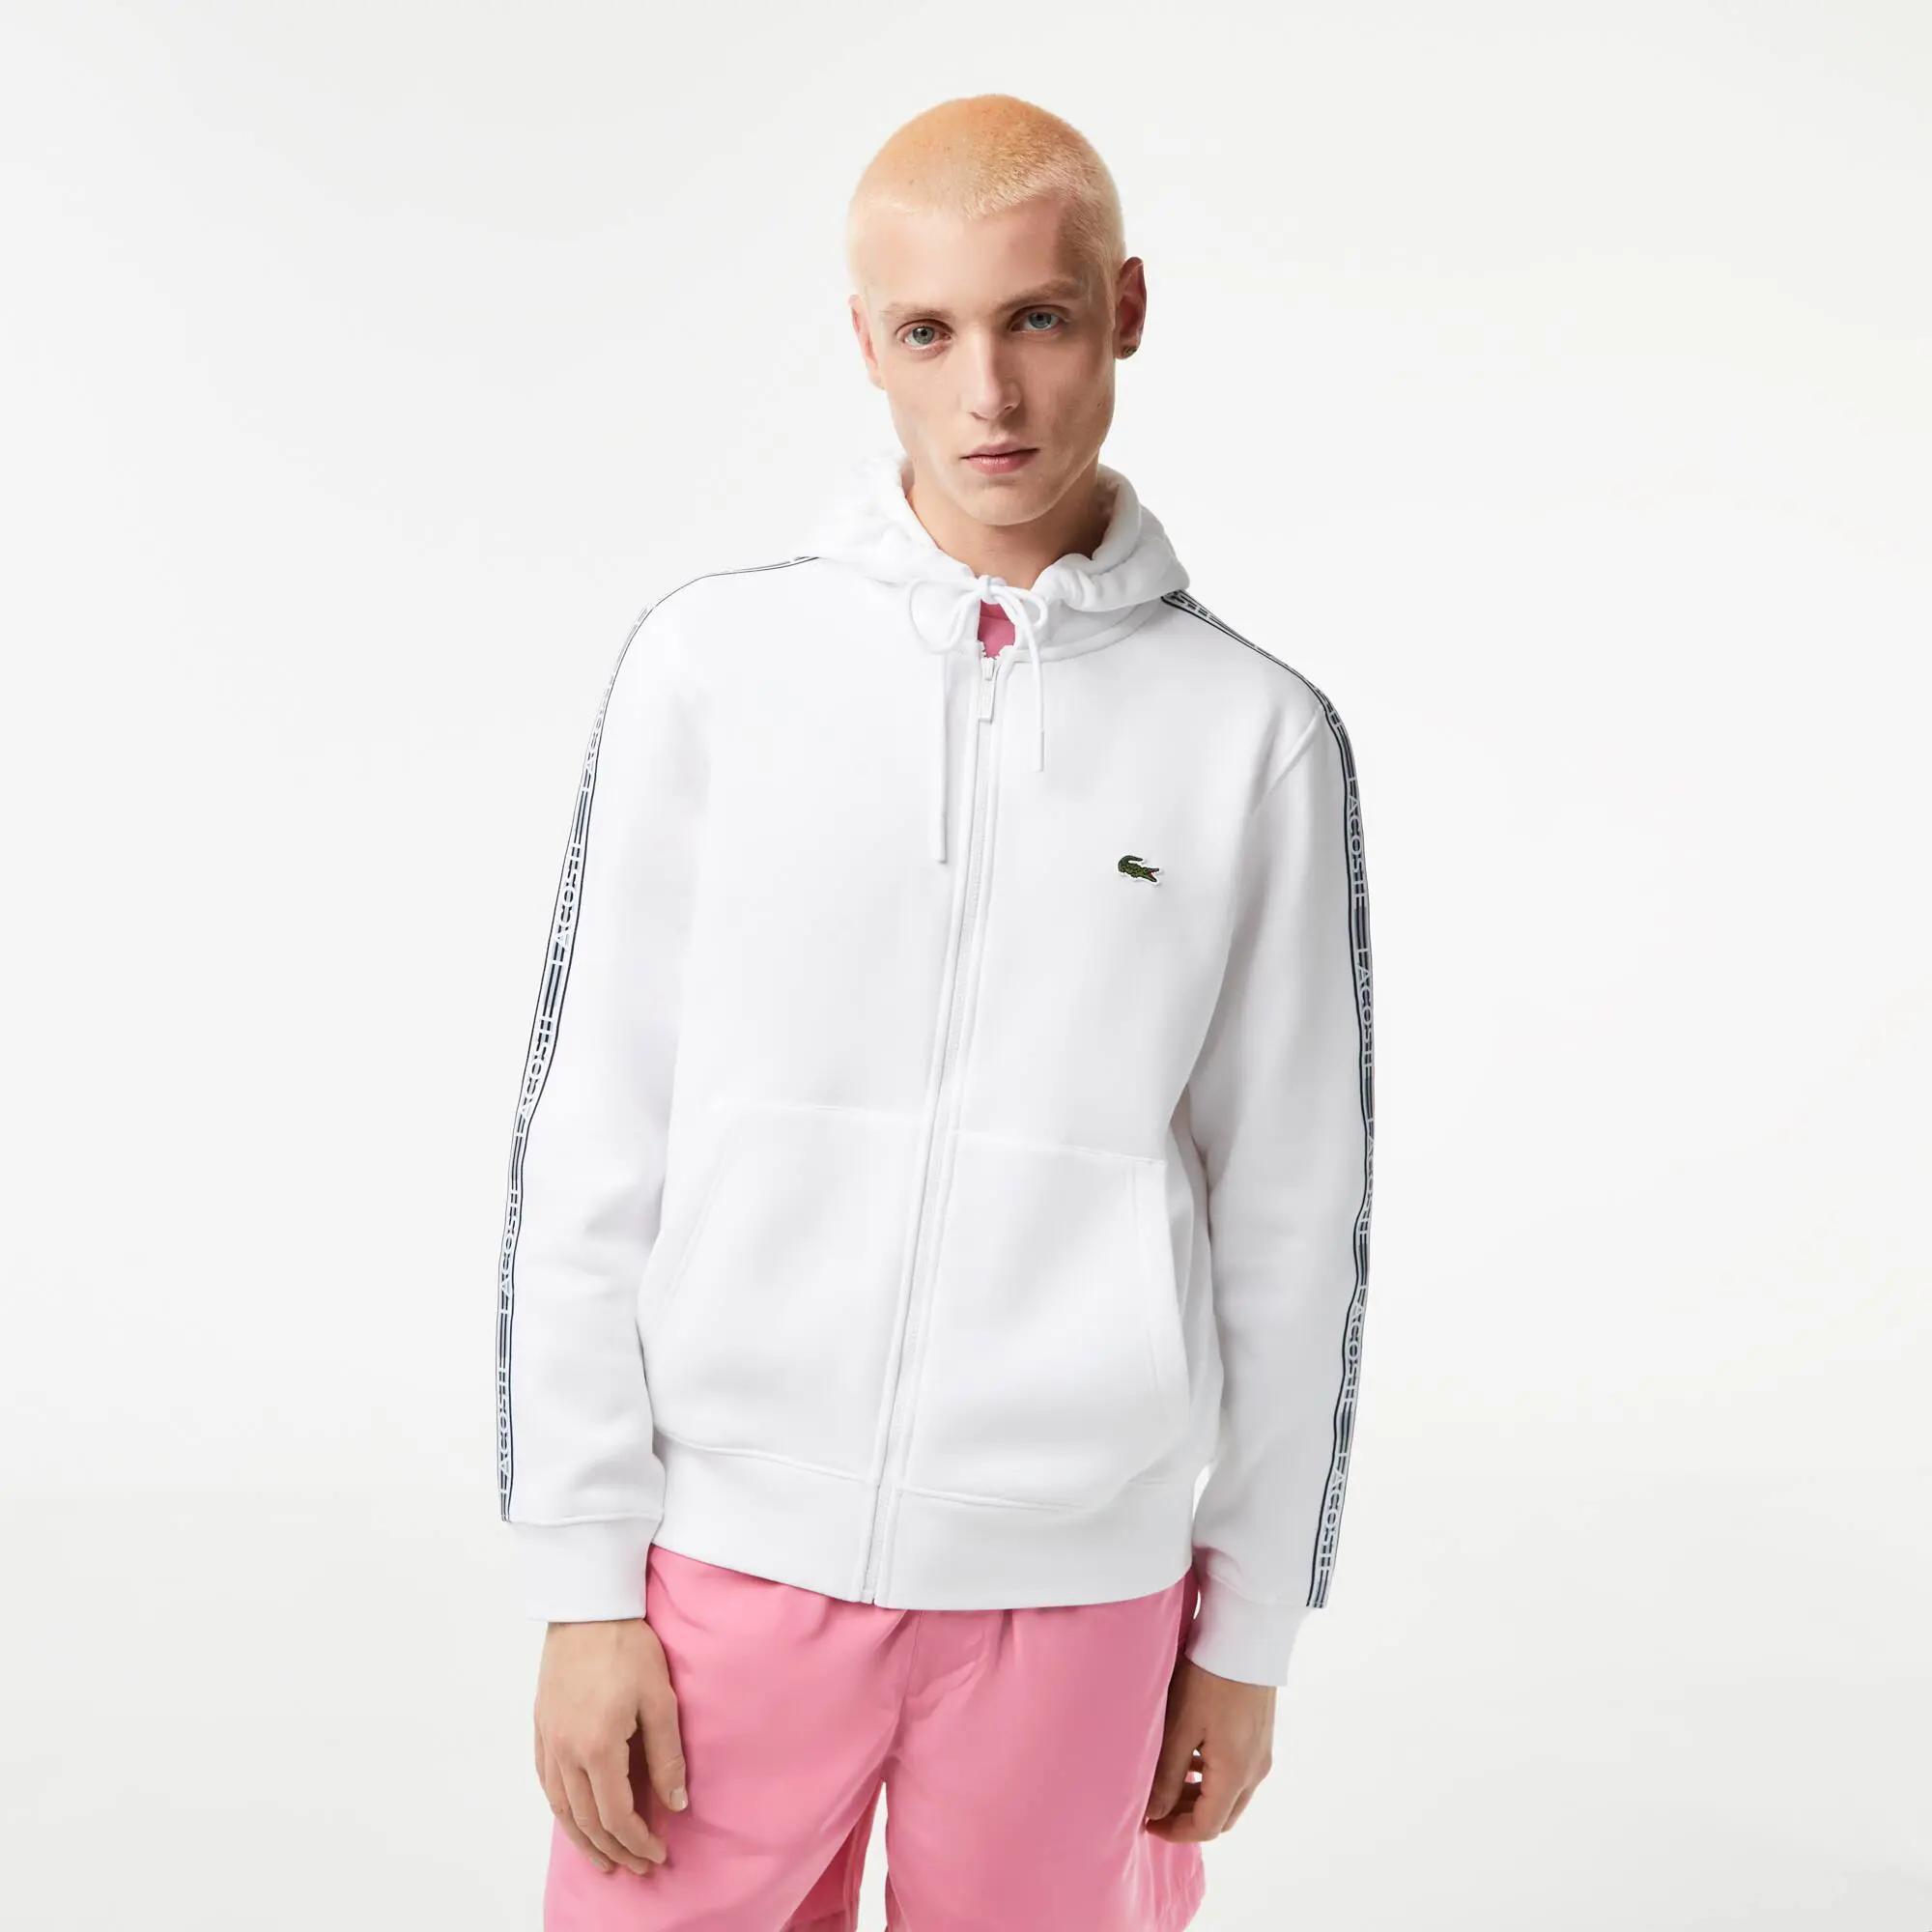 Lacoste Men’s Classic Fit Zipped Jogger Hoodie with Brand Stripes. 1